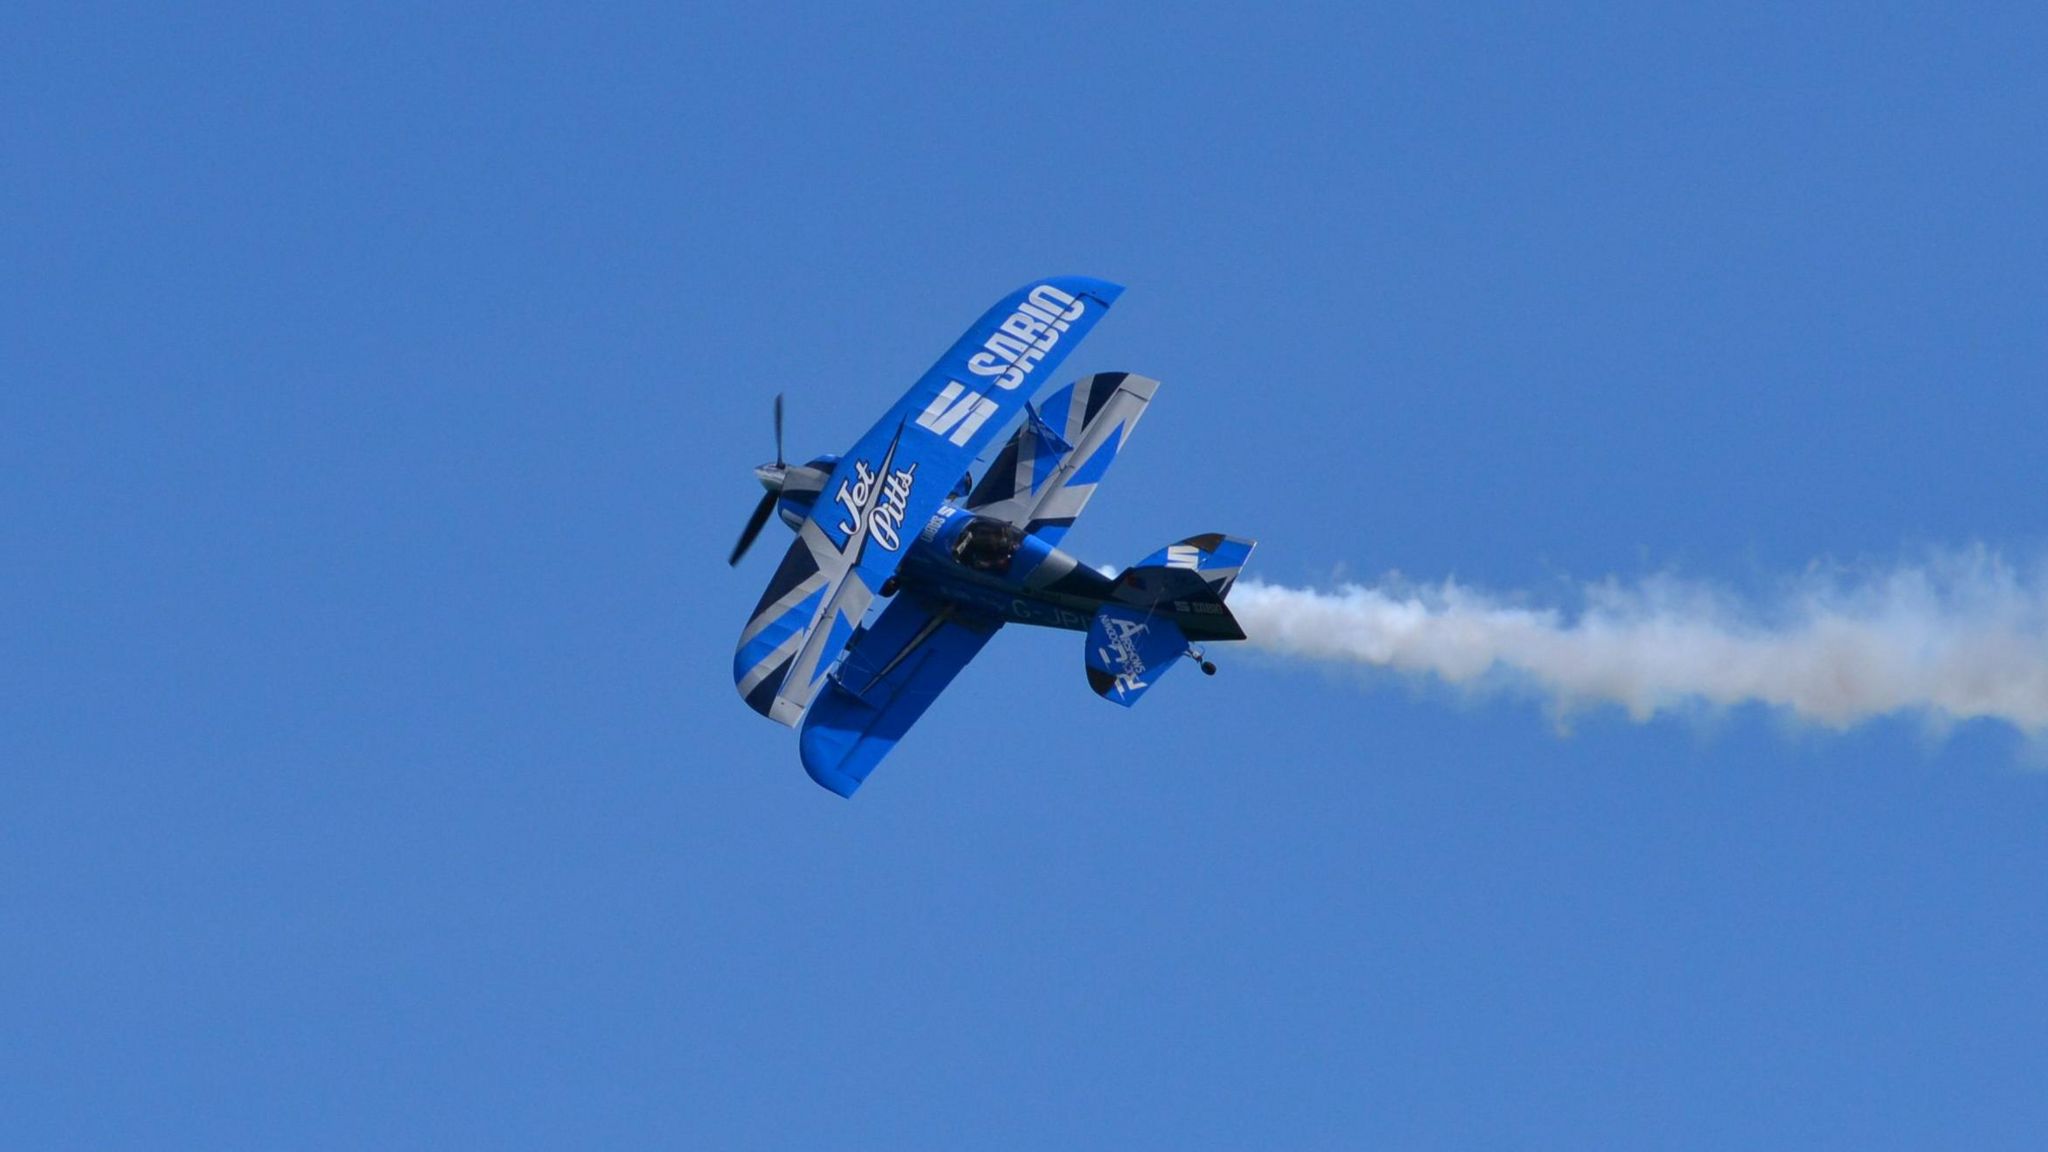 Jet Pitts plane in Guernsey Air Display